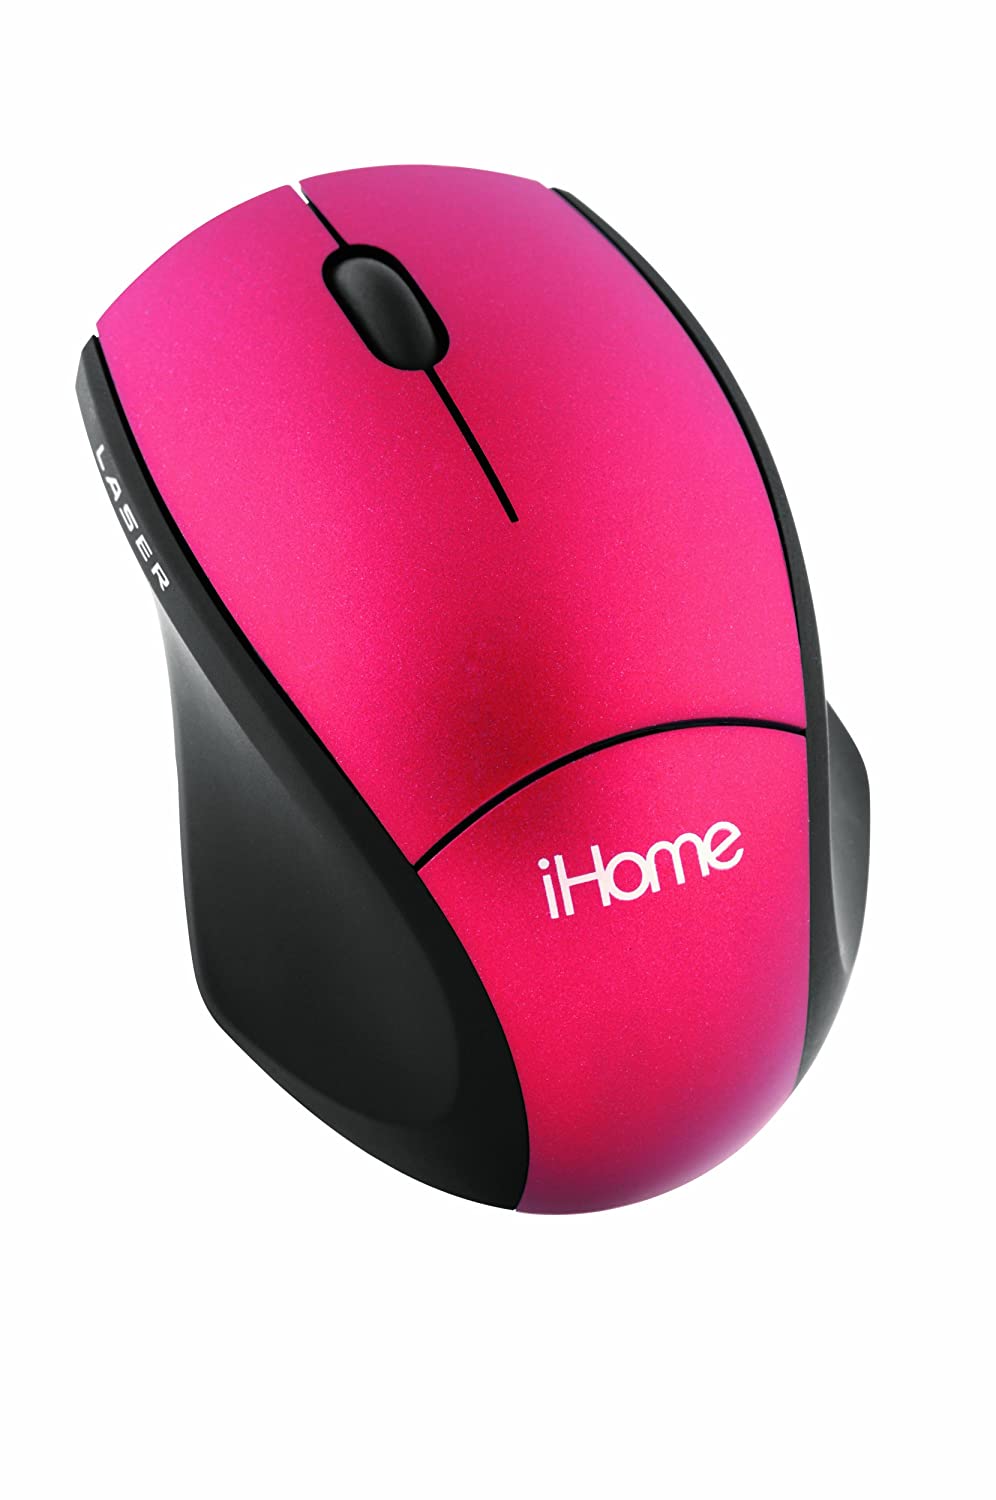 windows driver for mac mouse